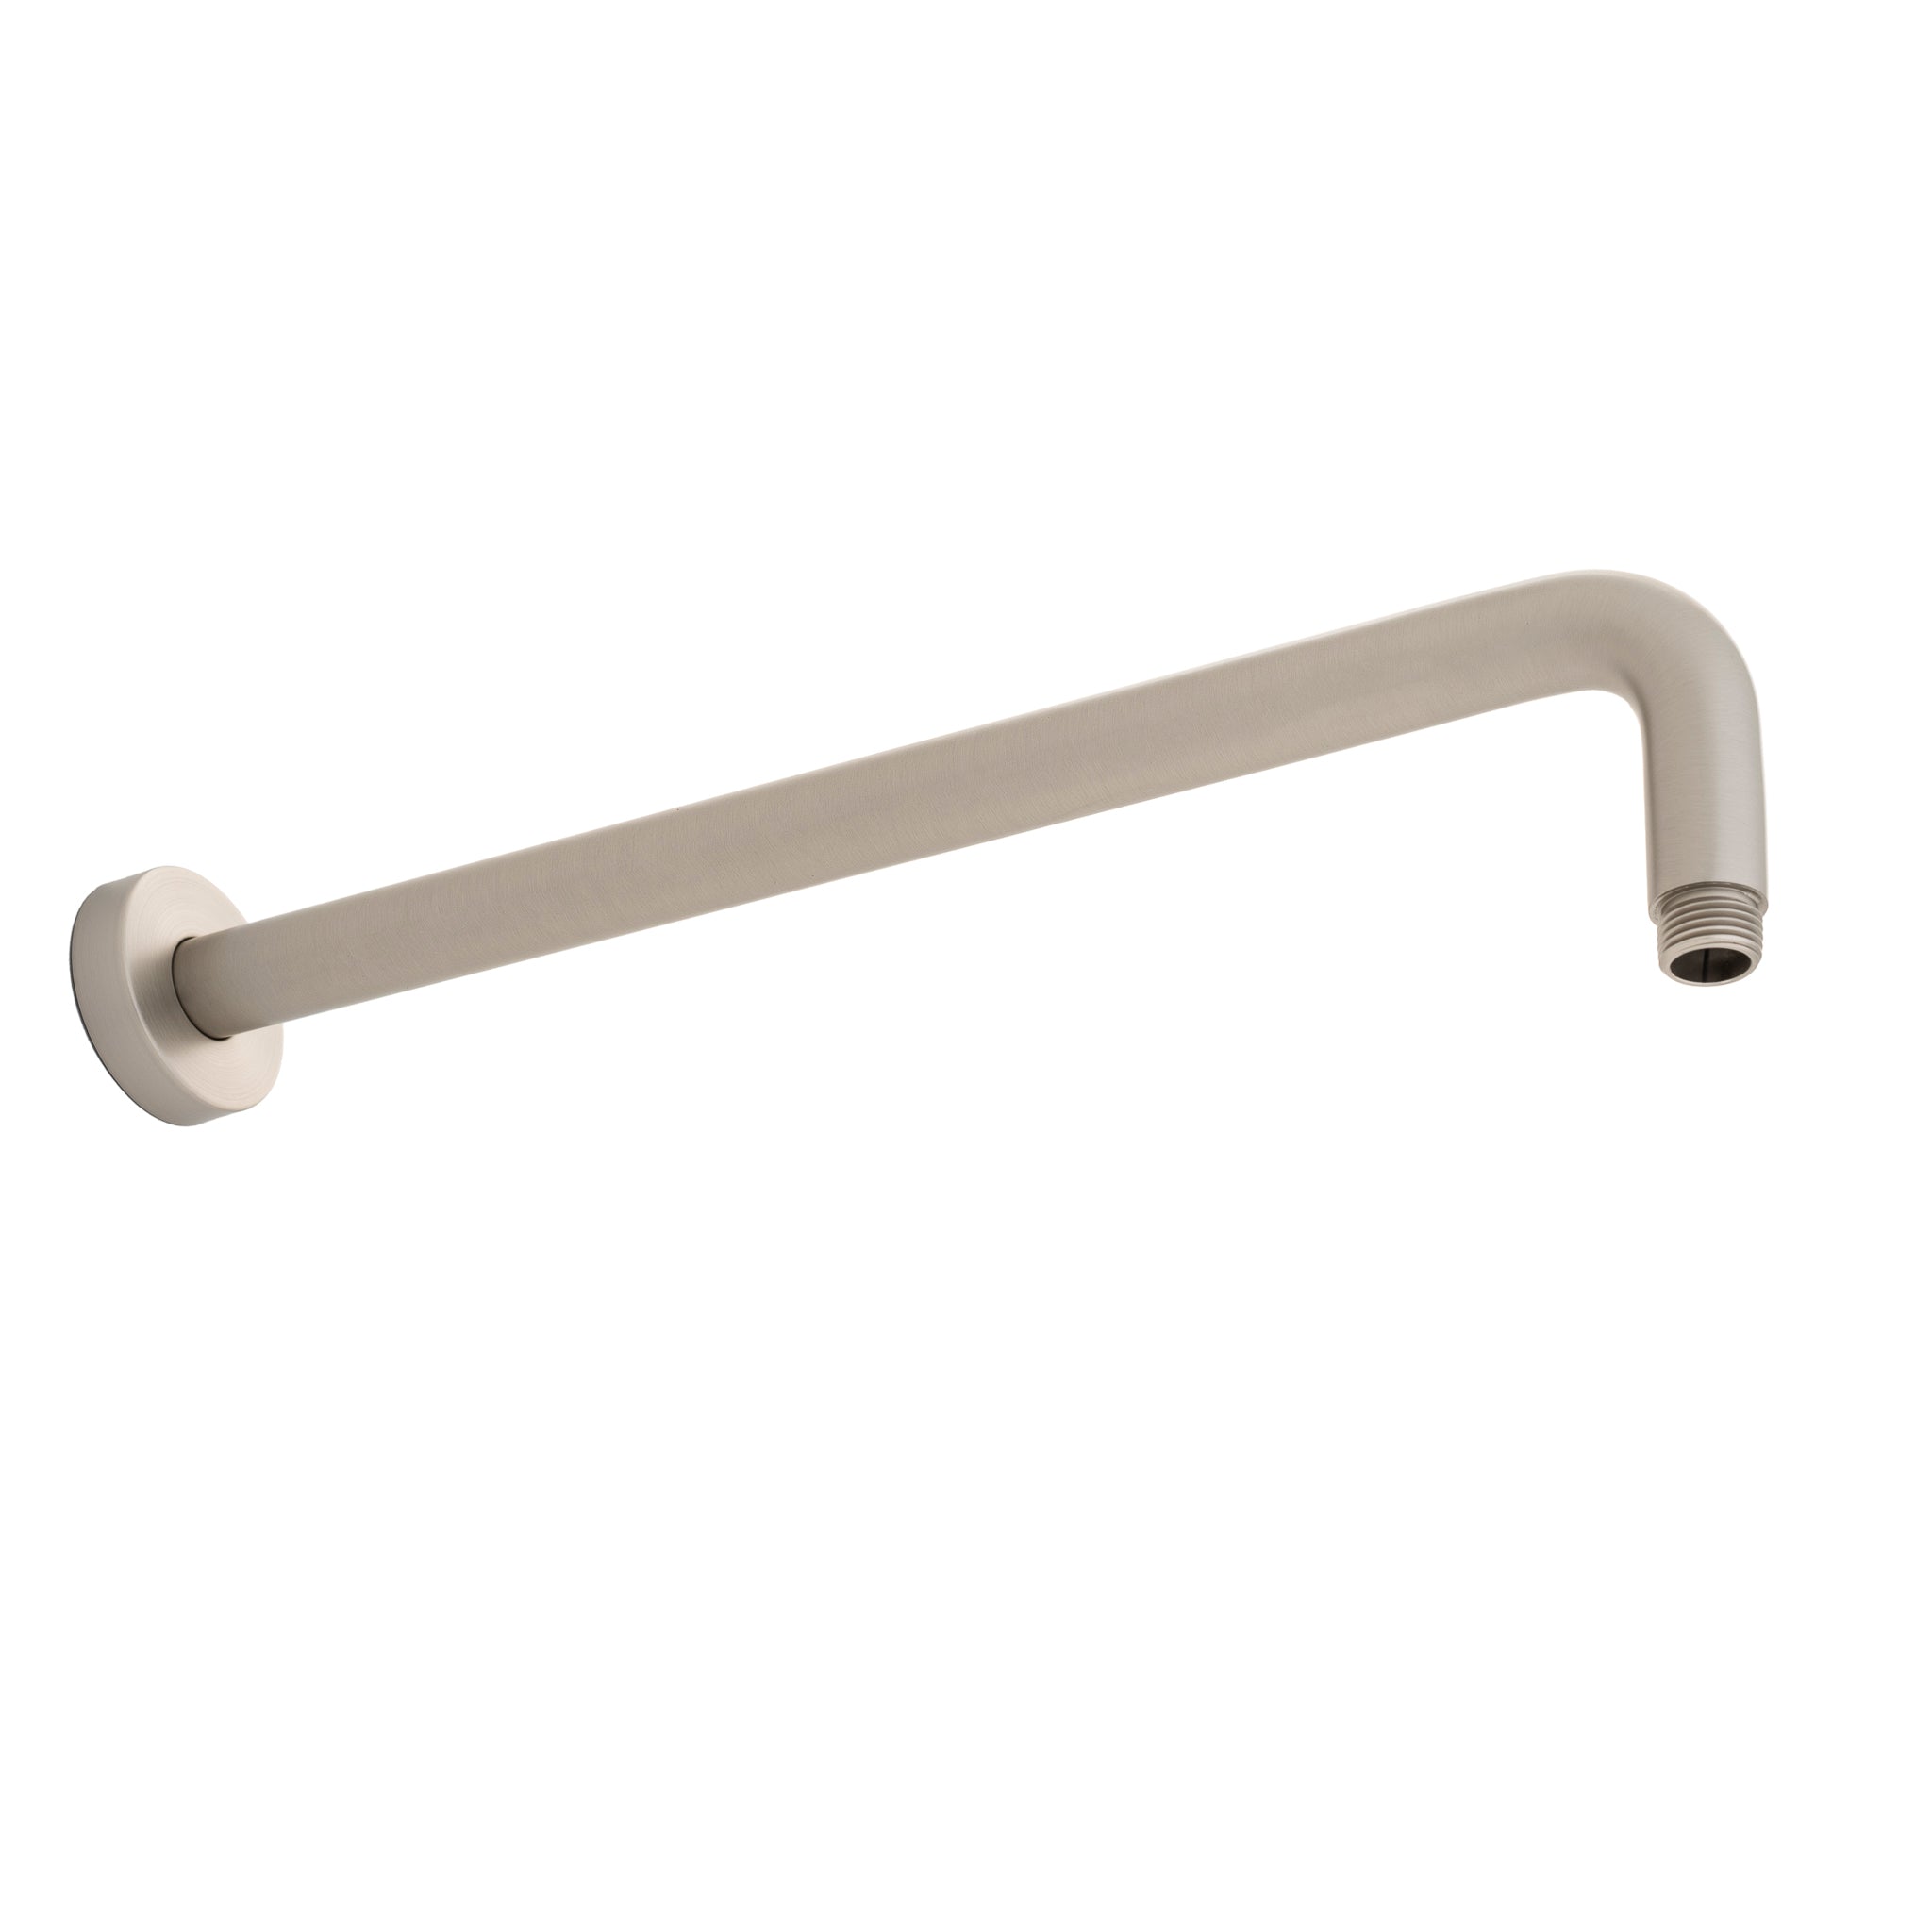 Round 400mm Shower Wall Arm, Brushed Nickel